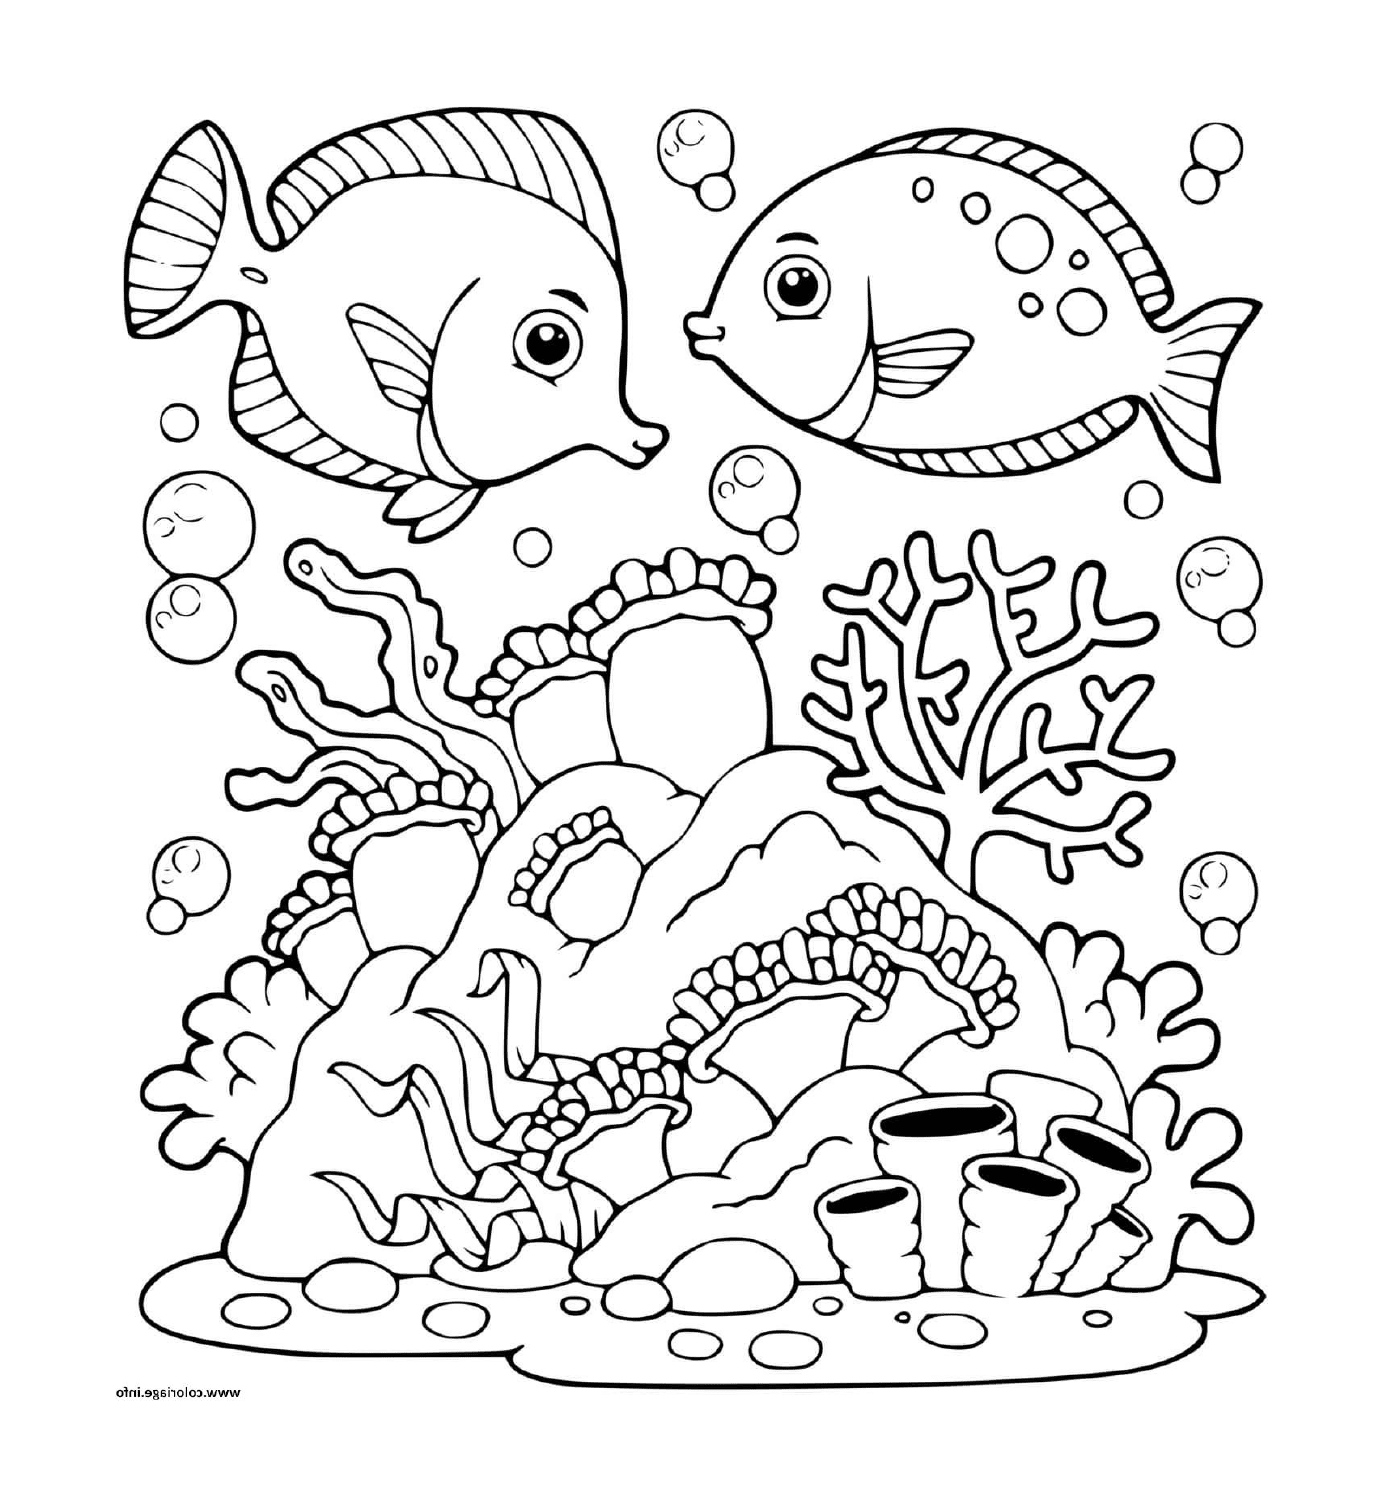  two fish 